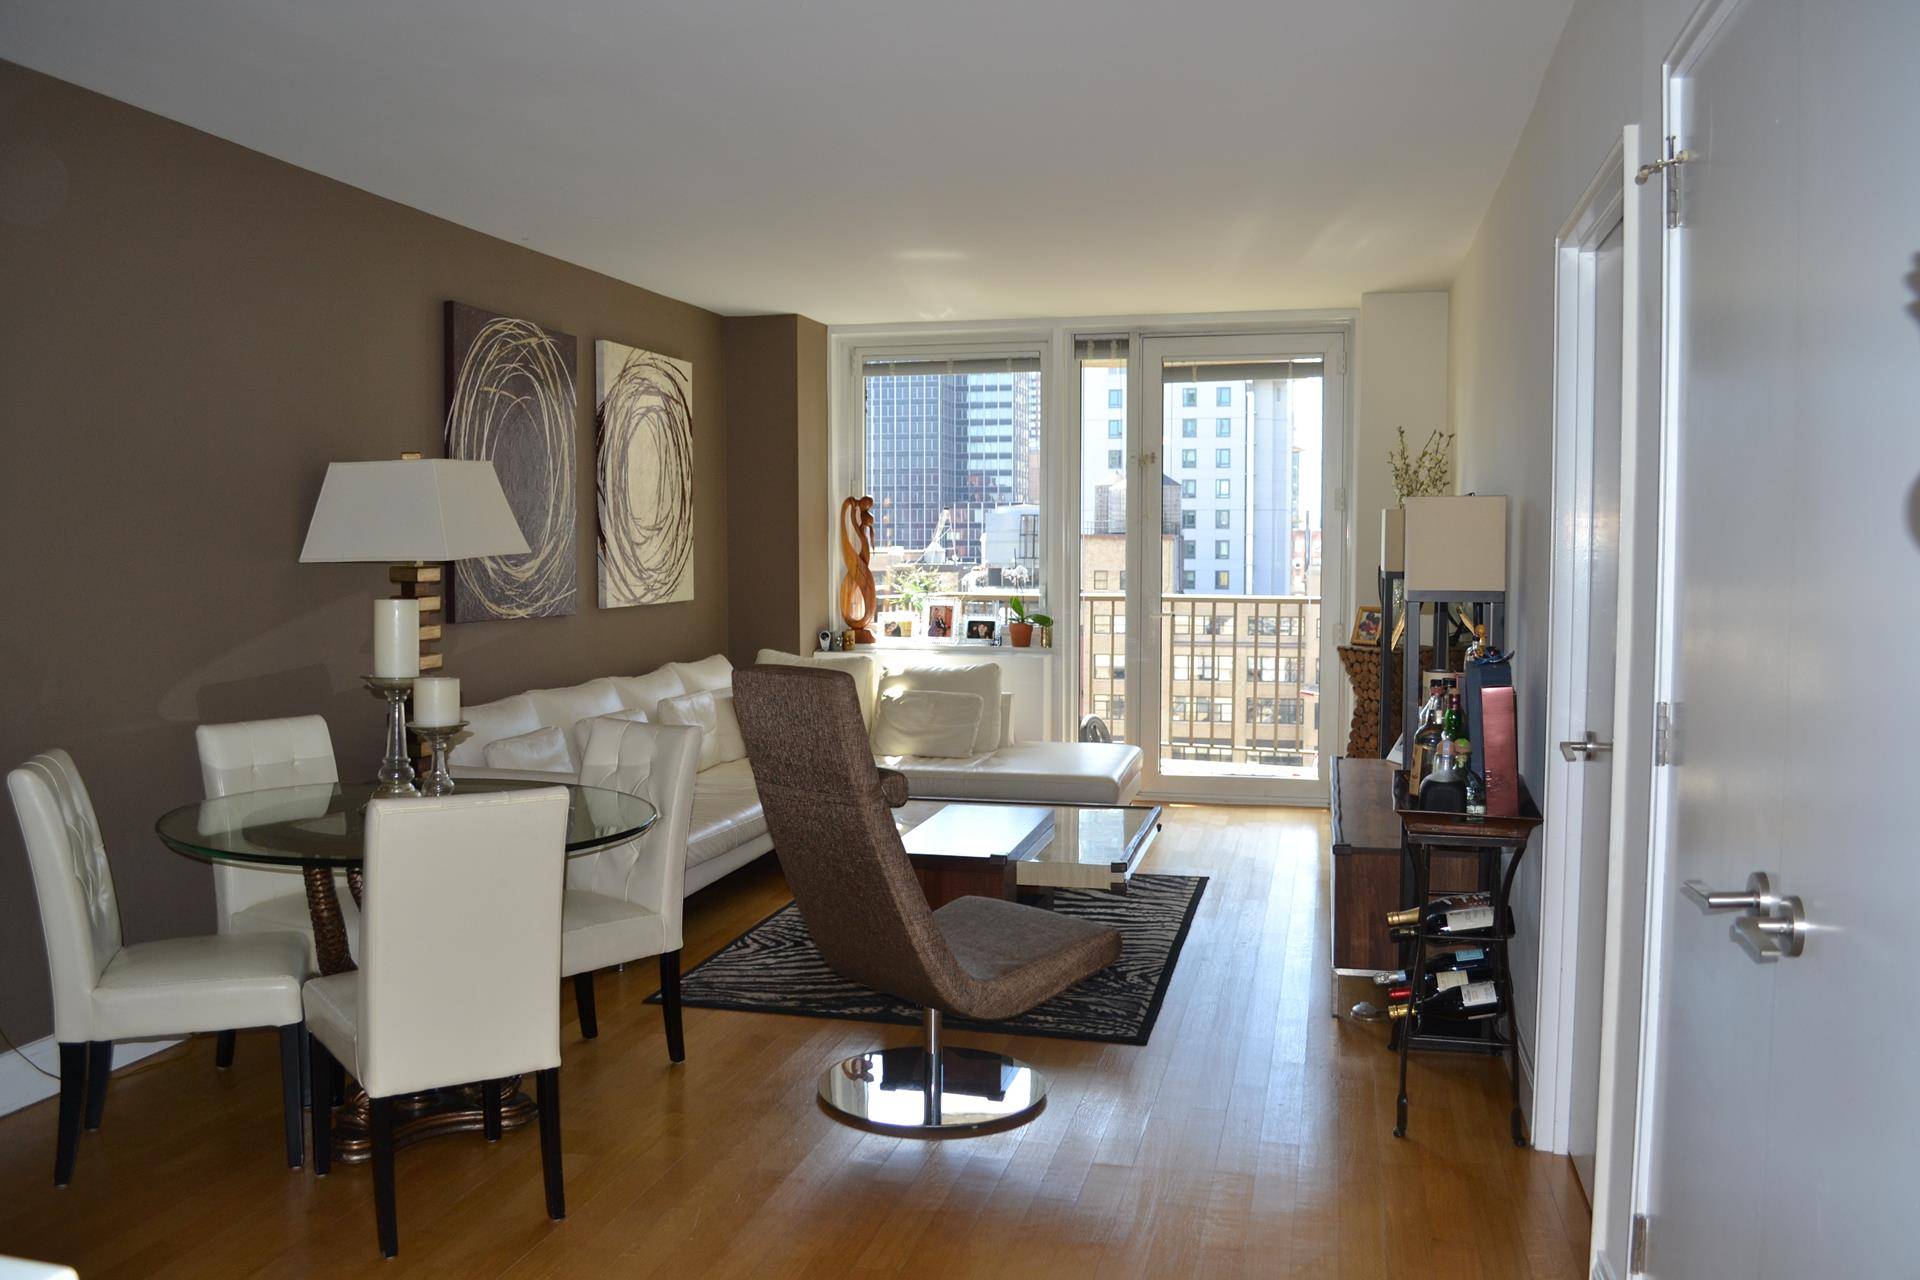 Turtle Bay's finest L'Ecole CondominiumsConveniently situated in Midtown close to Grand Central.